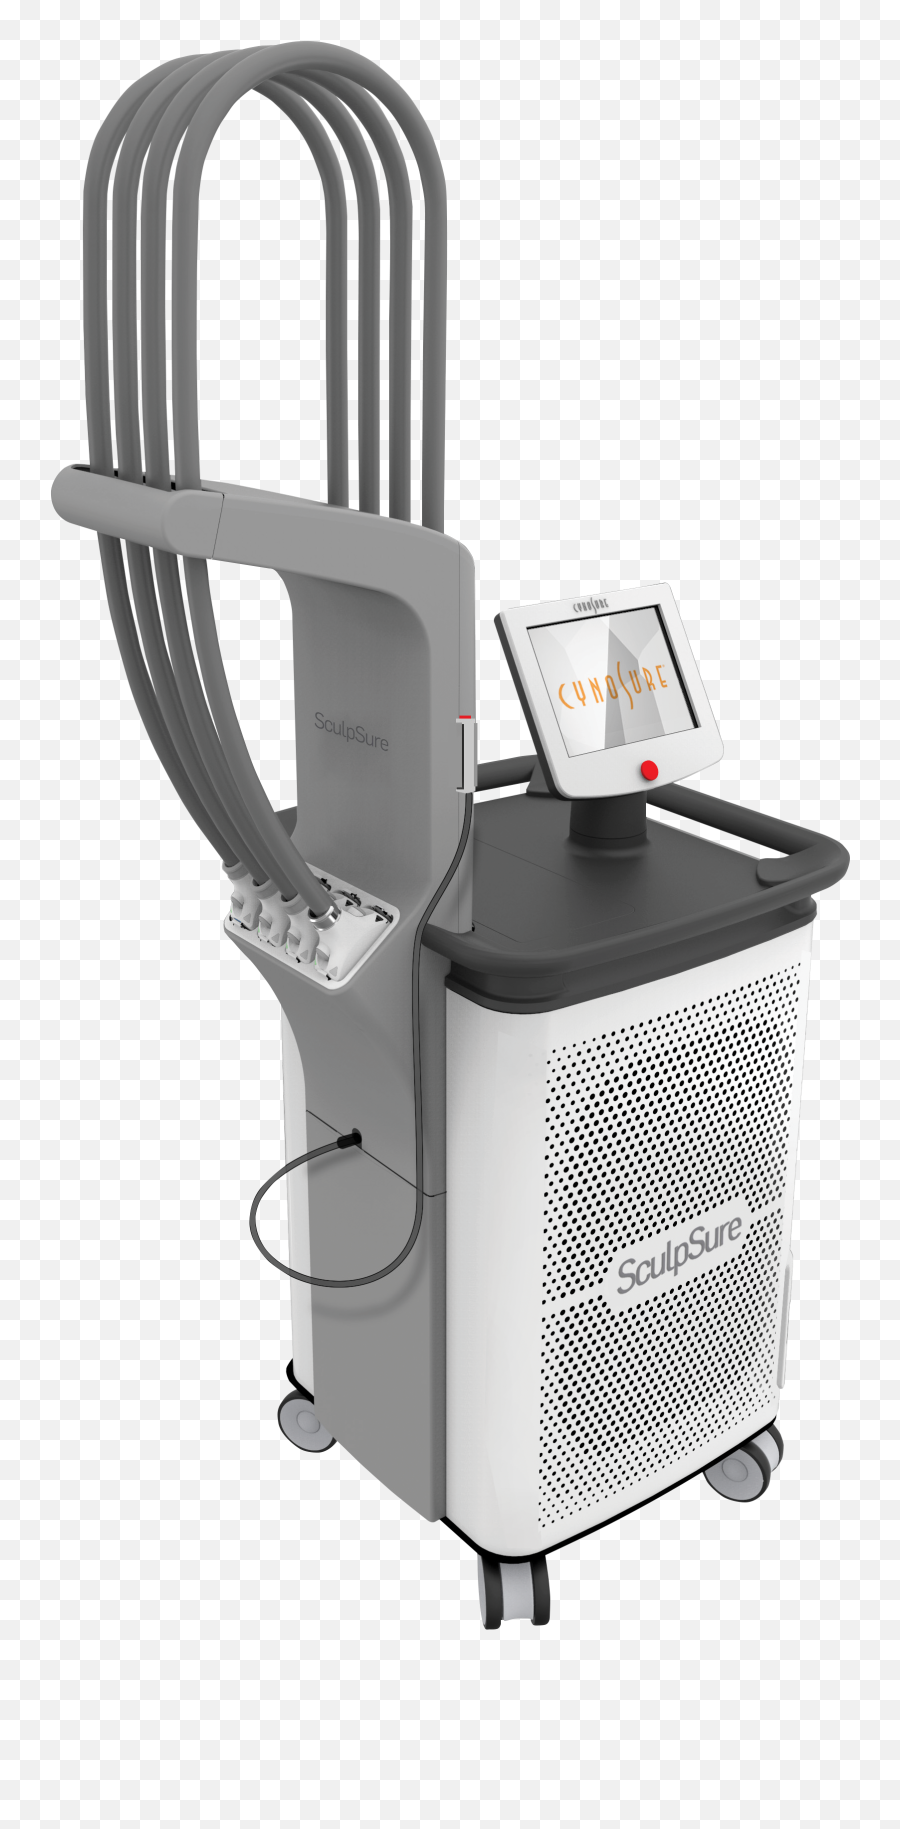 Perhaps Dont Get Sculpsure - Cynosure Sculpsure Laser Png,Palomar Icon Laser